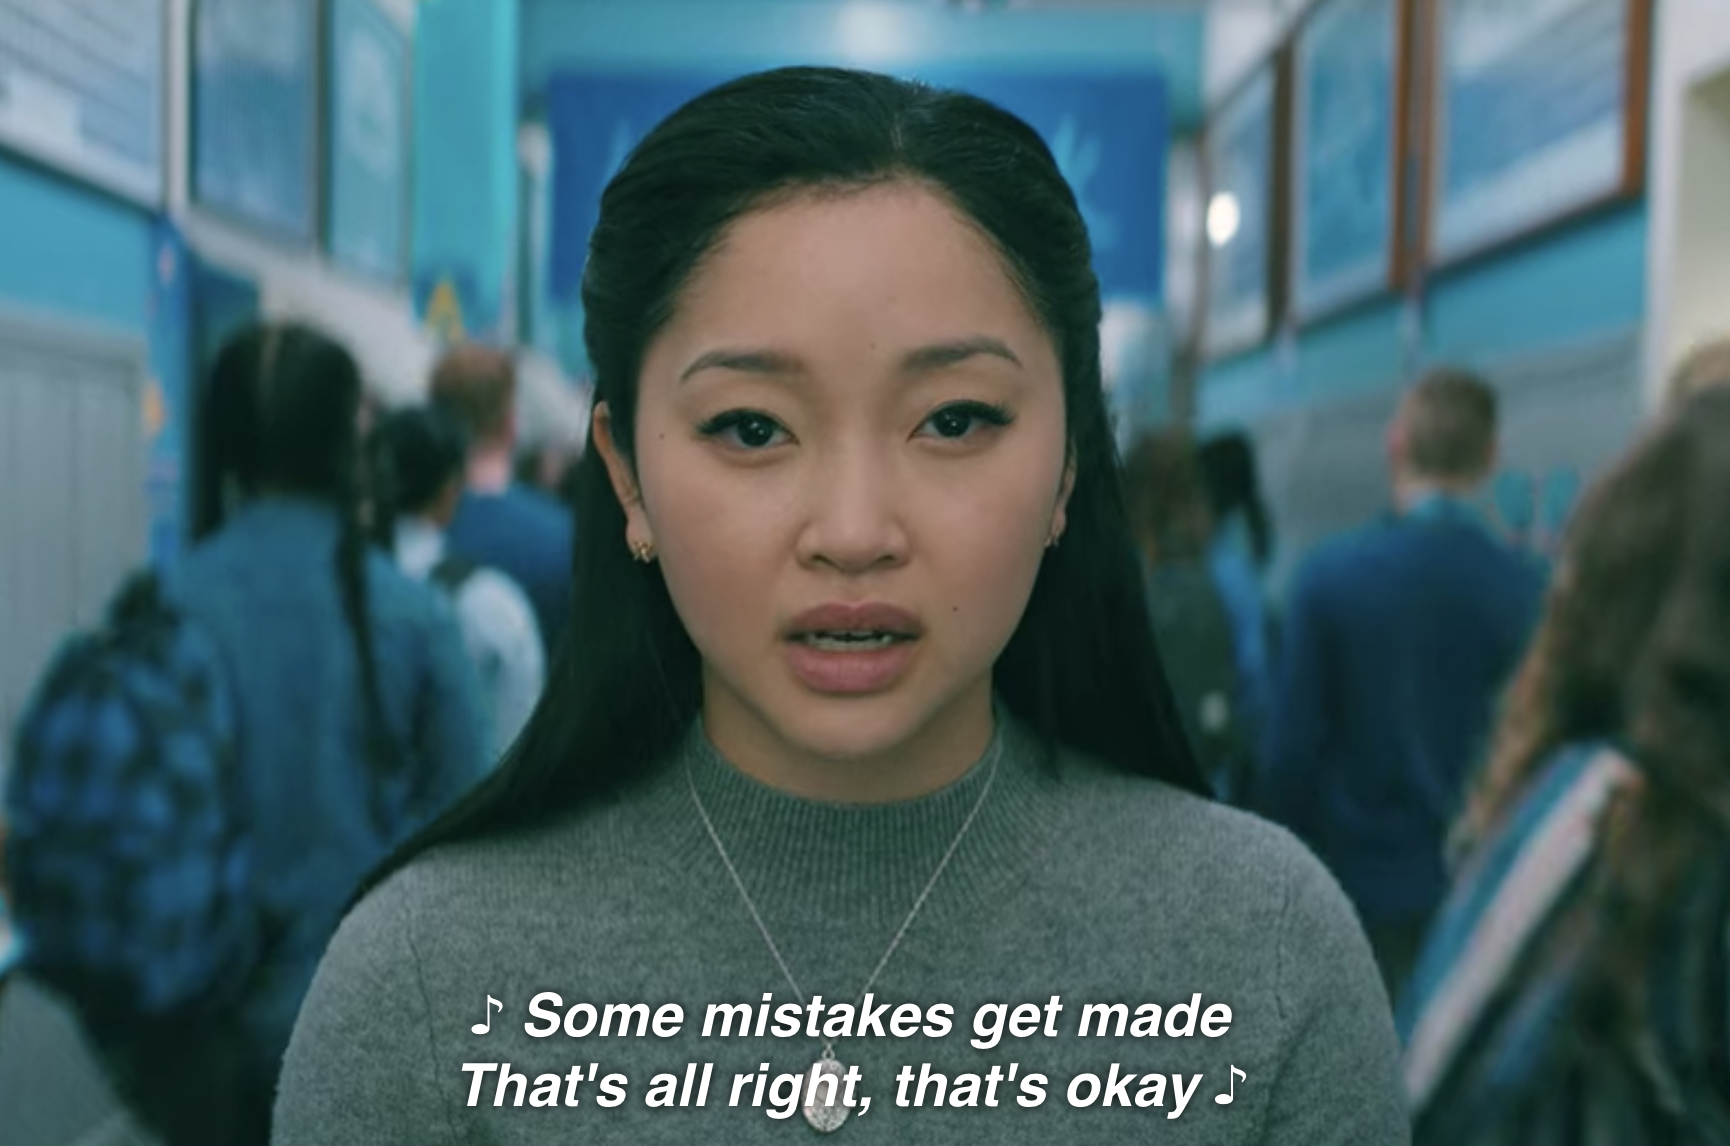 Lara Jean sadly singing &quot;Some mistakes get made that&#x27;s all right, that&#x27;s okay&quot;